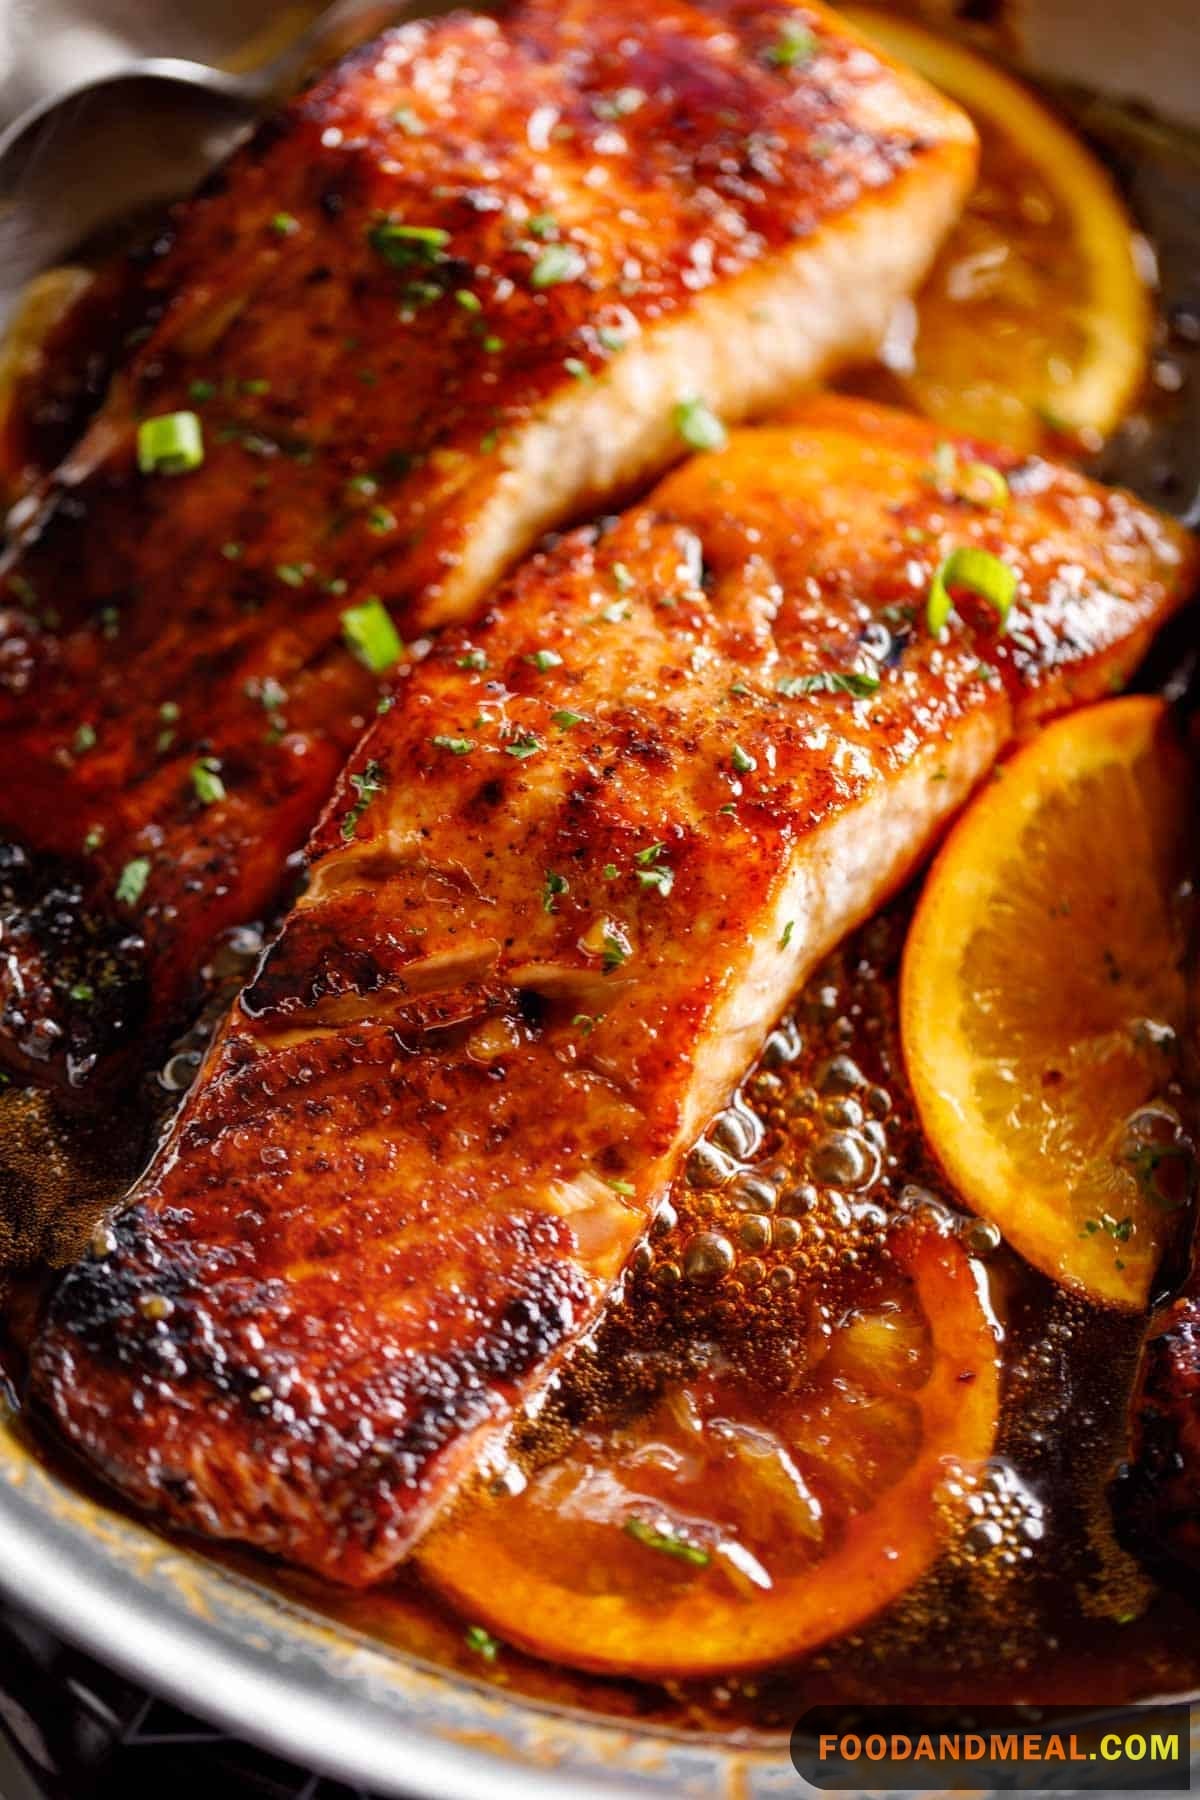 Grilled Salmon In Orange-Soy Marinade 